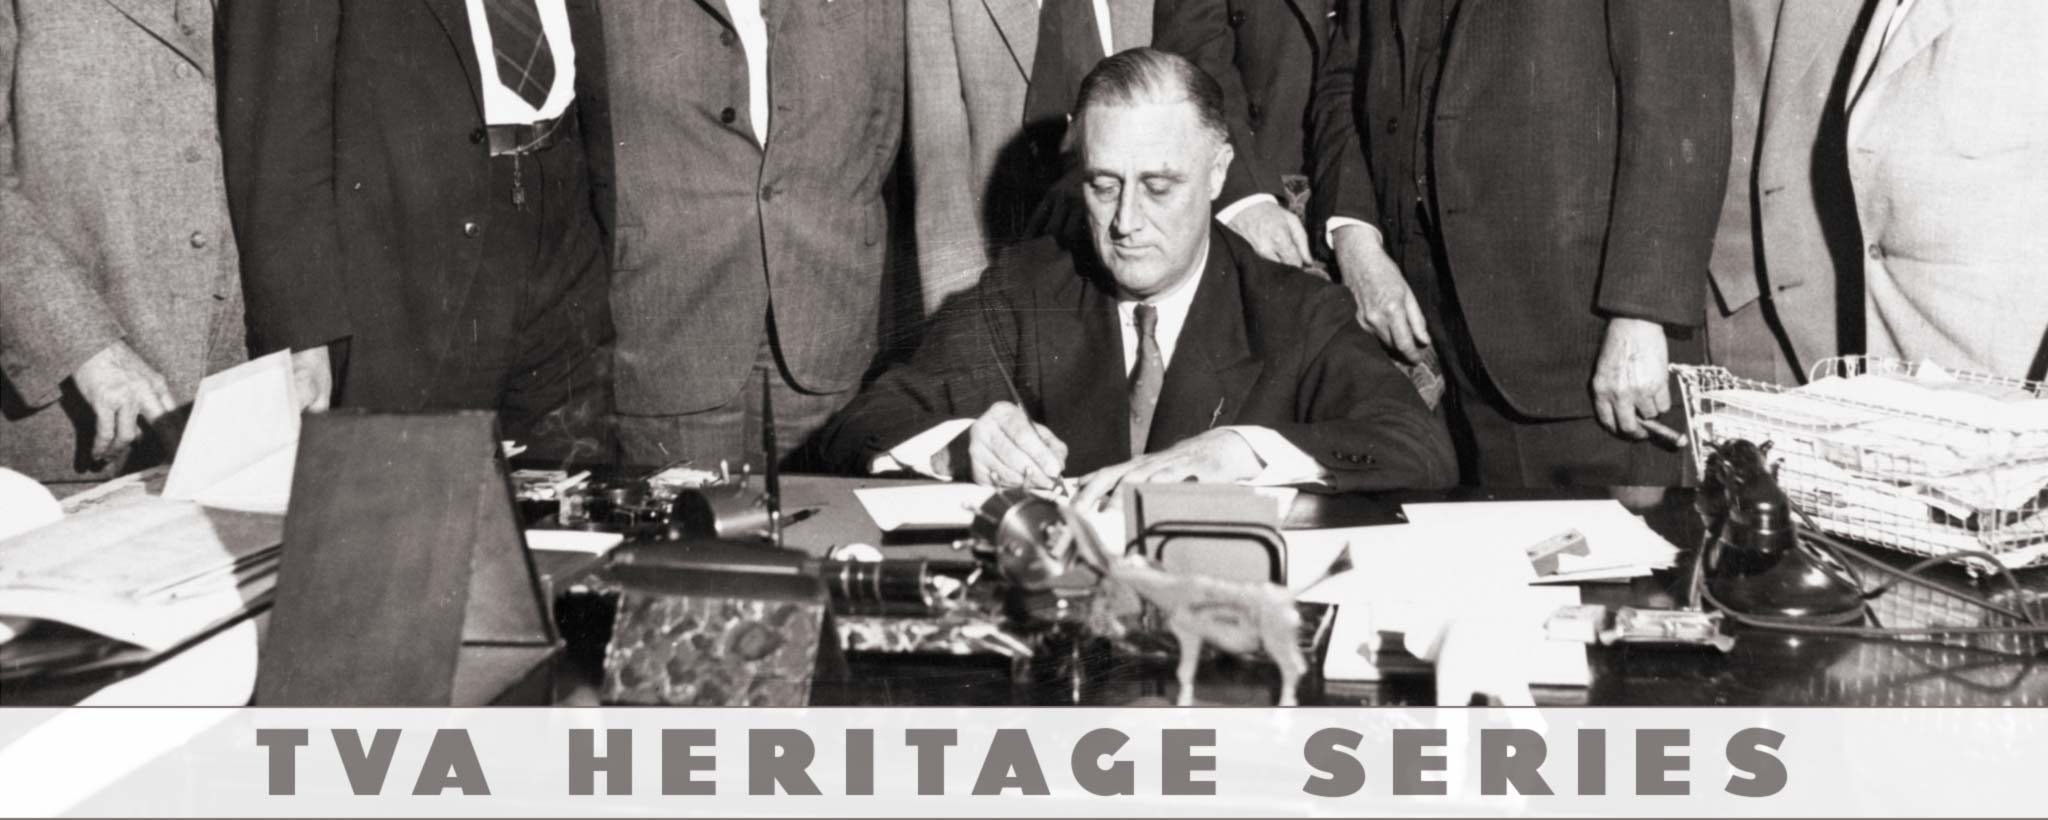 FDR signing TVA Act